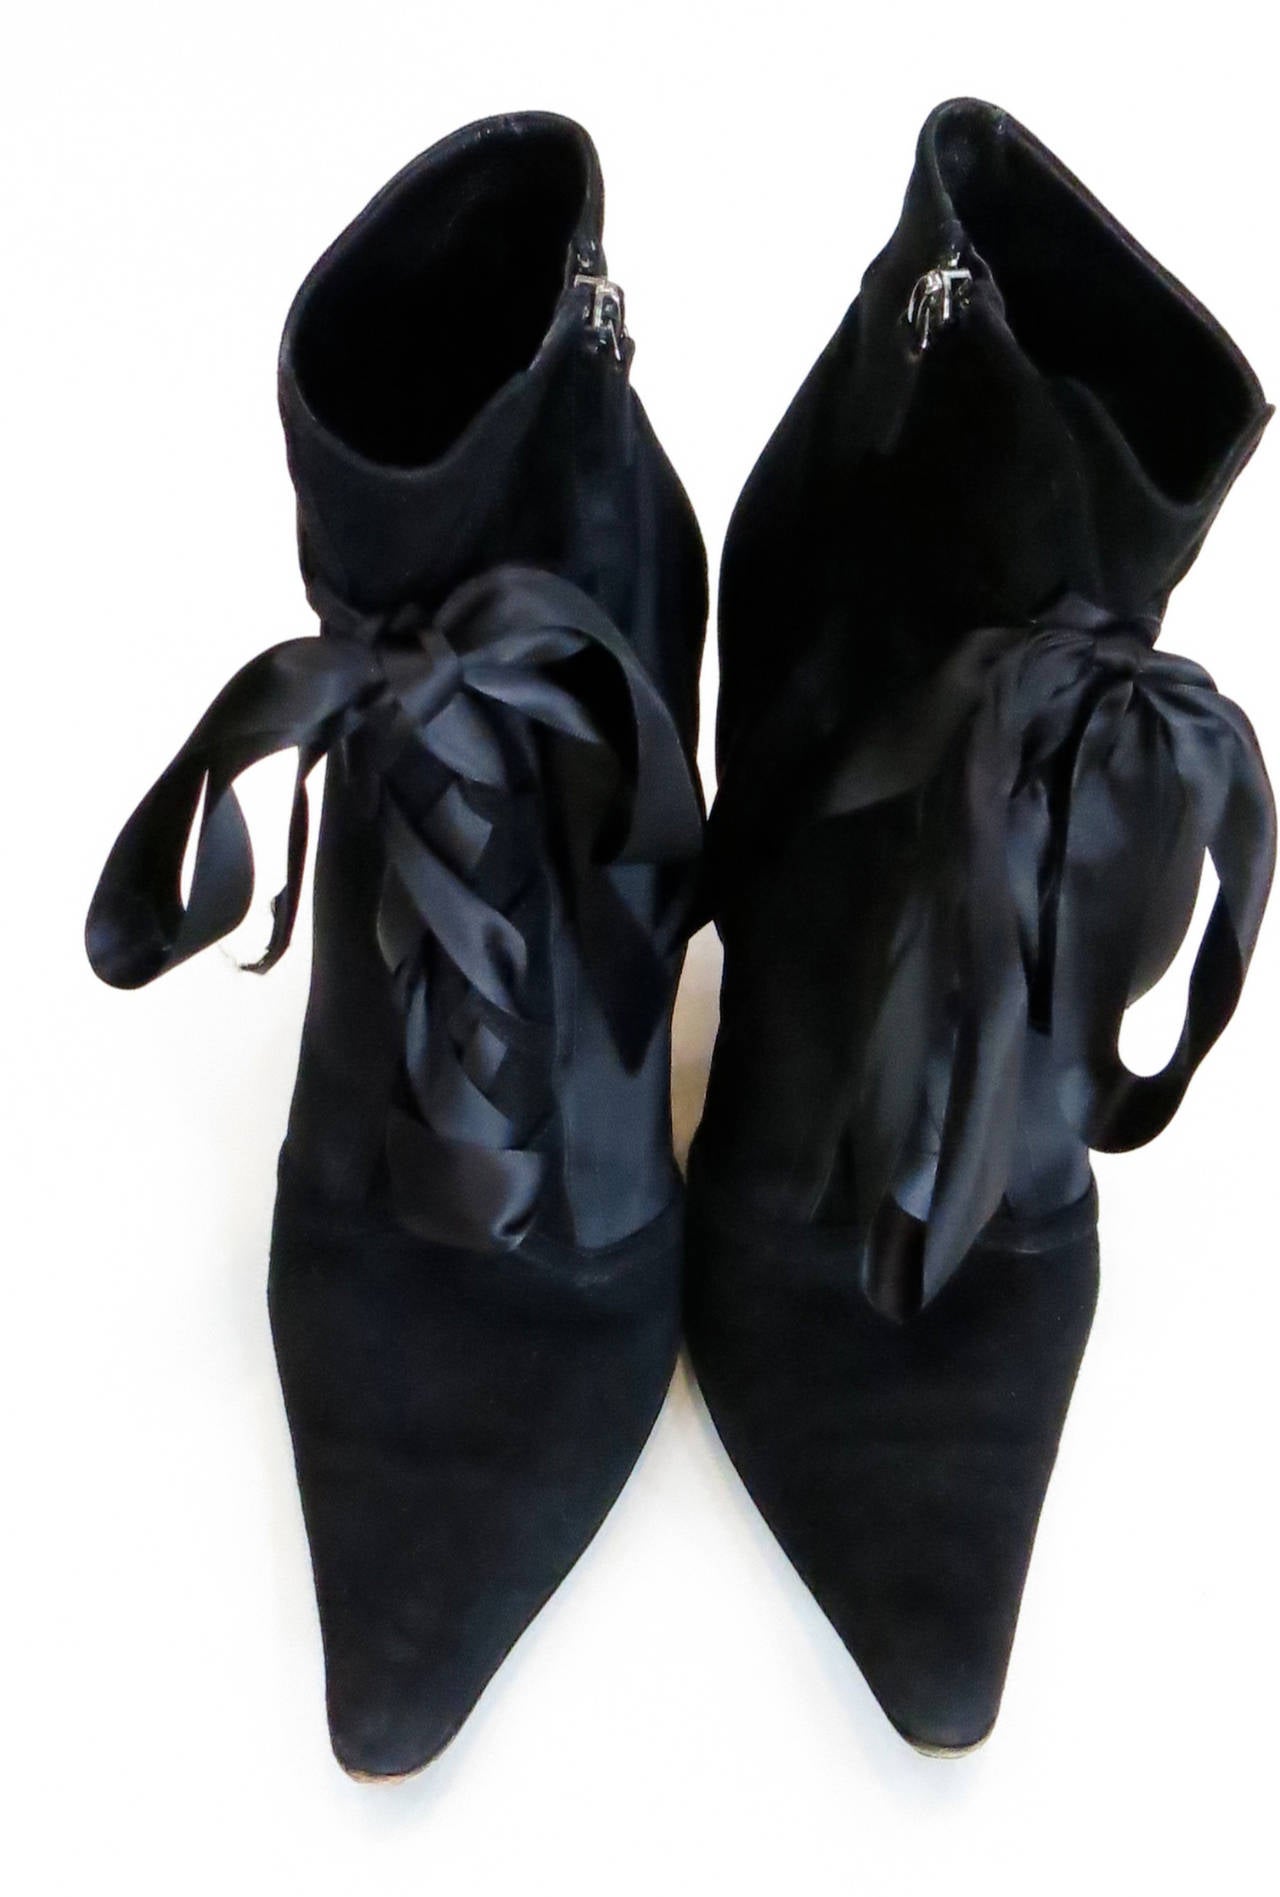 1990s Oscar de la Renta black satin and suede ankle boots with leather lining and sole. Label reads 